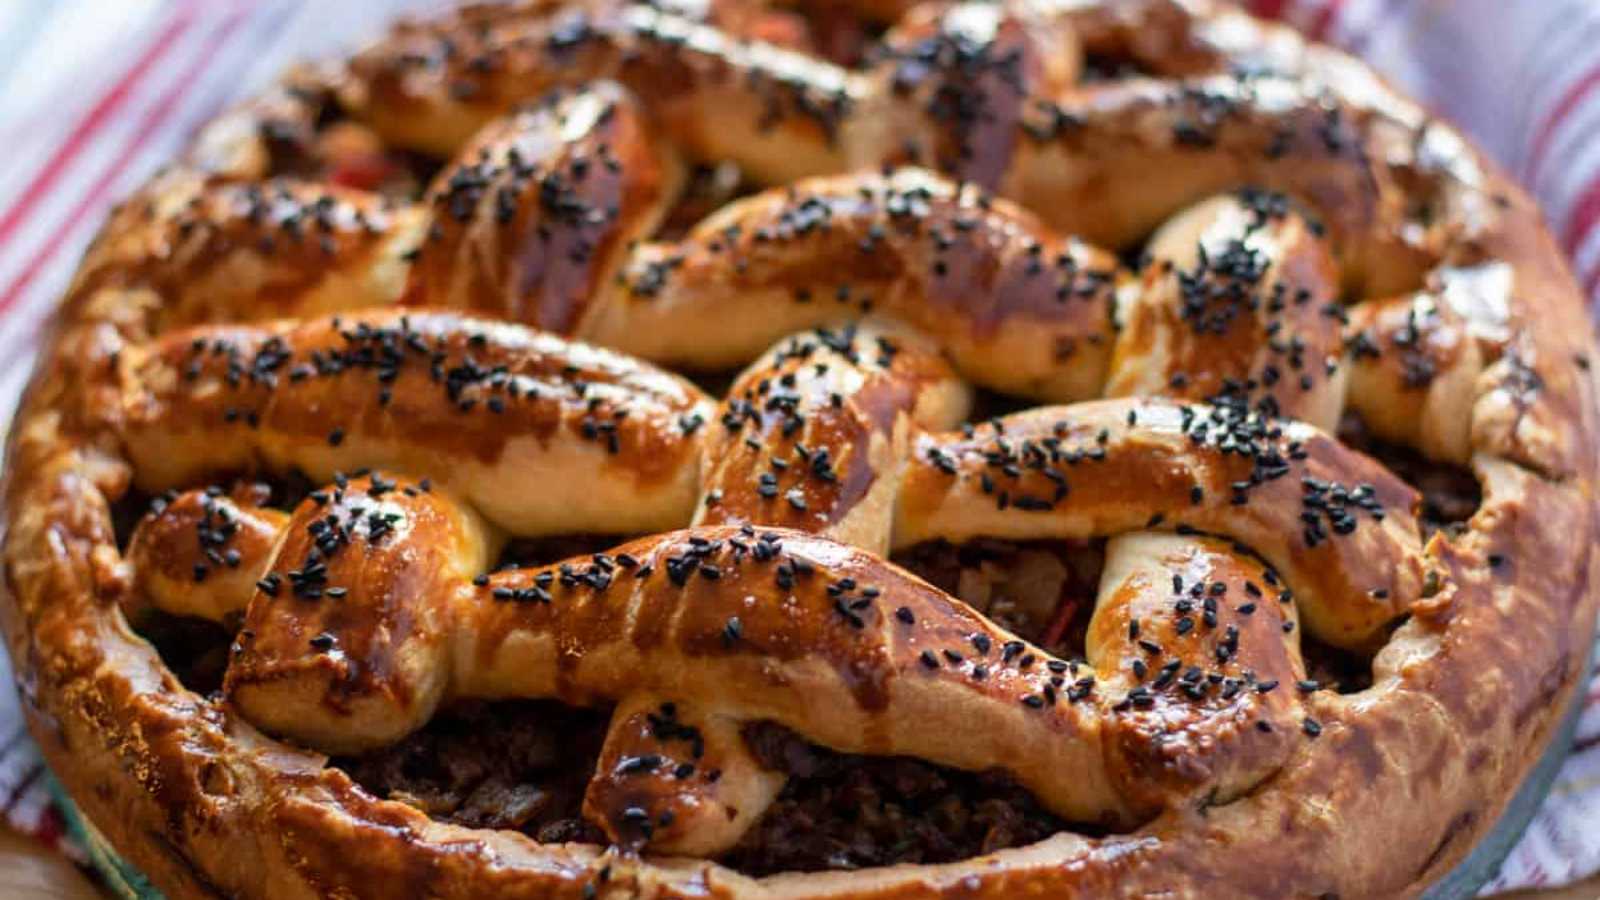 A whole beef pie adorned with a sprinkle of black sesame seeds.